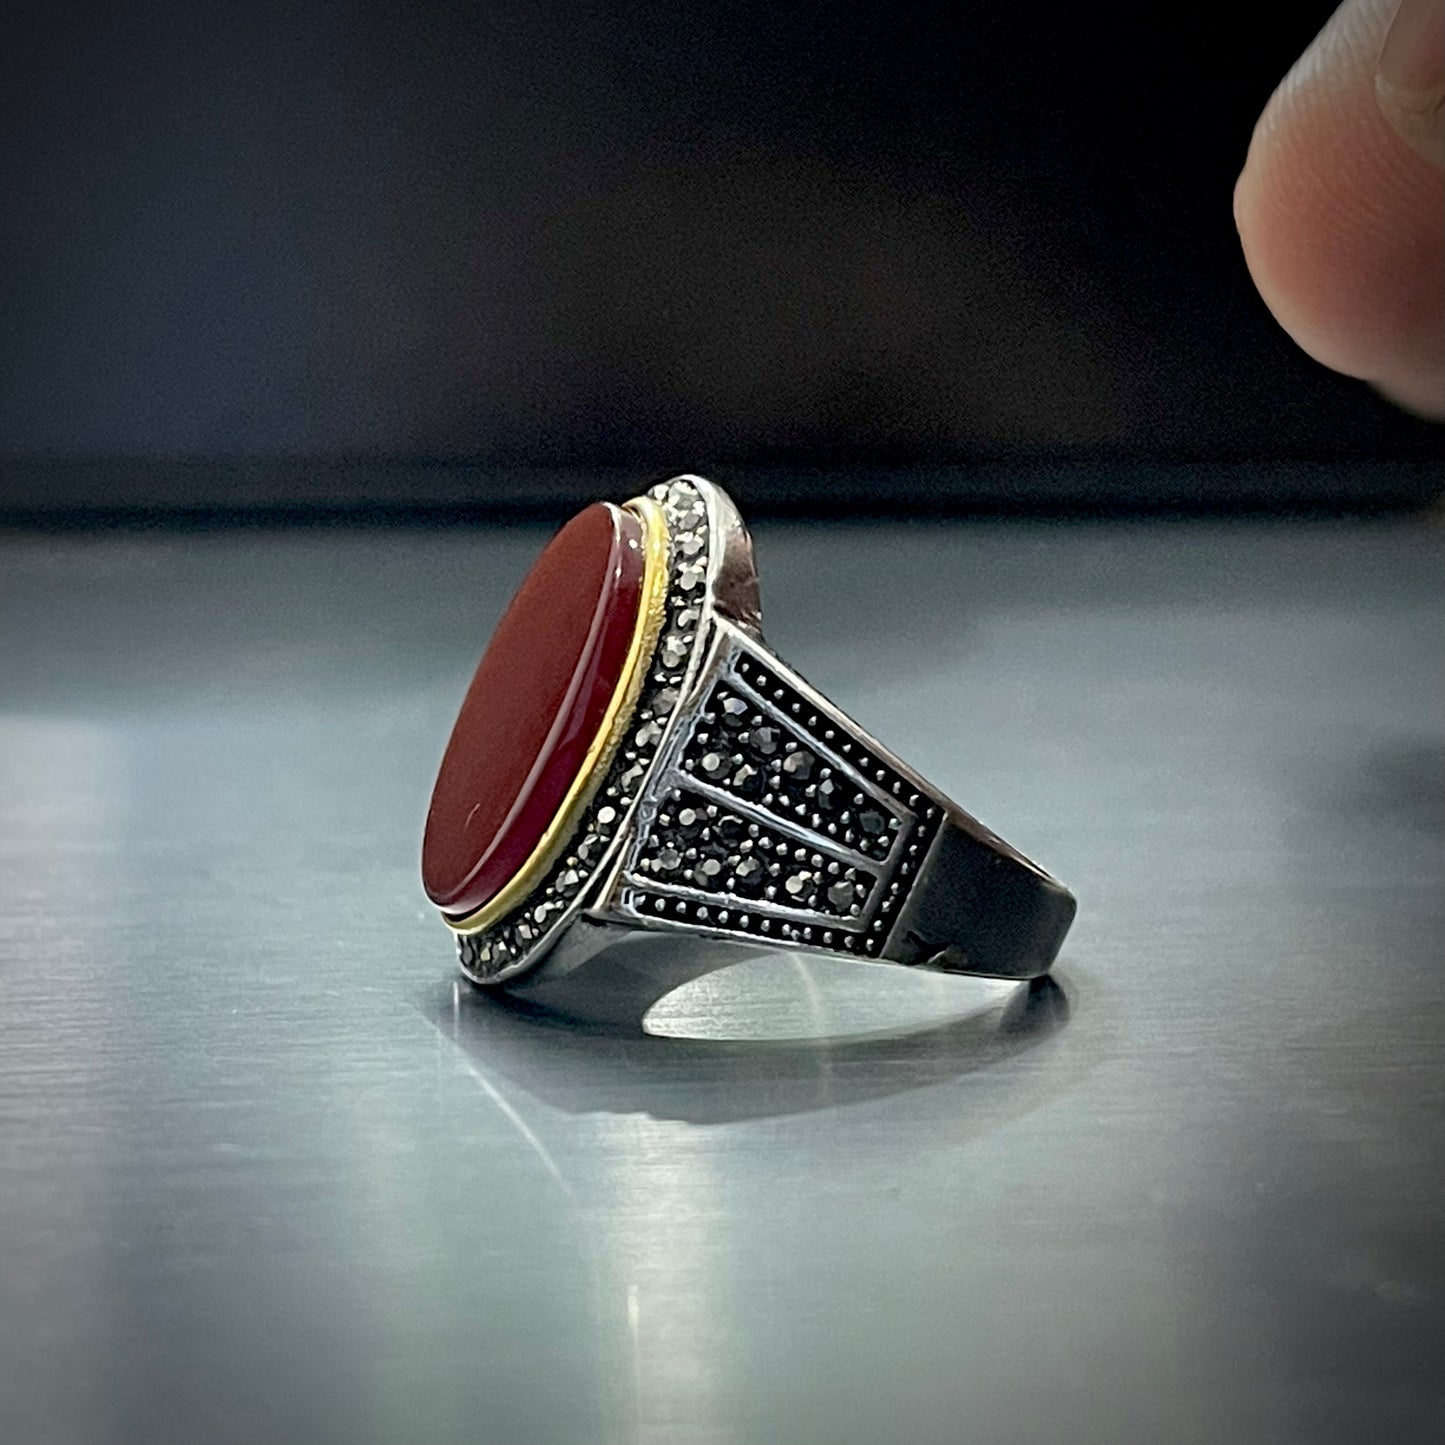 Red Oval Stone Turkish Ring For Men